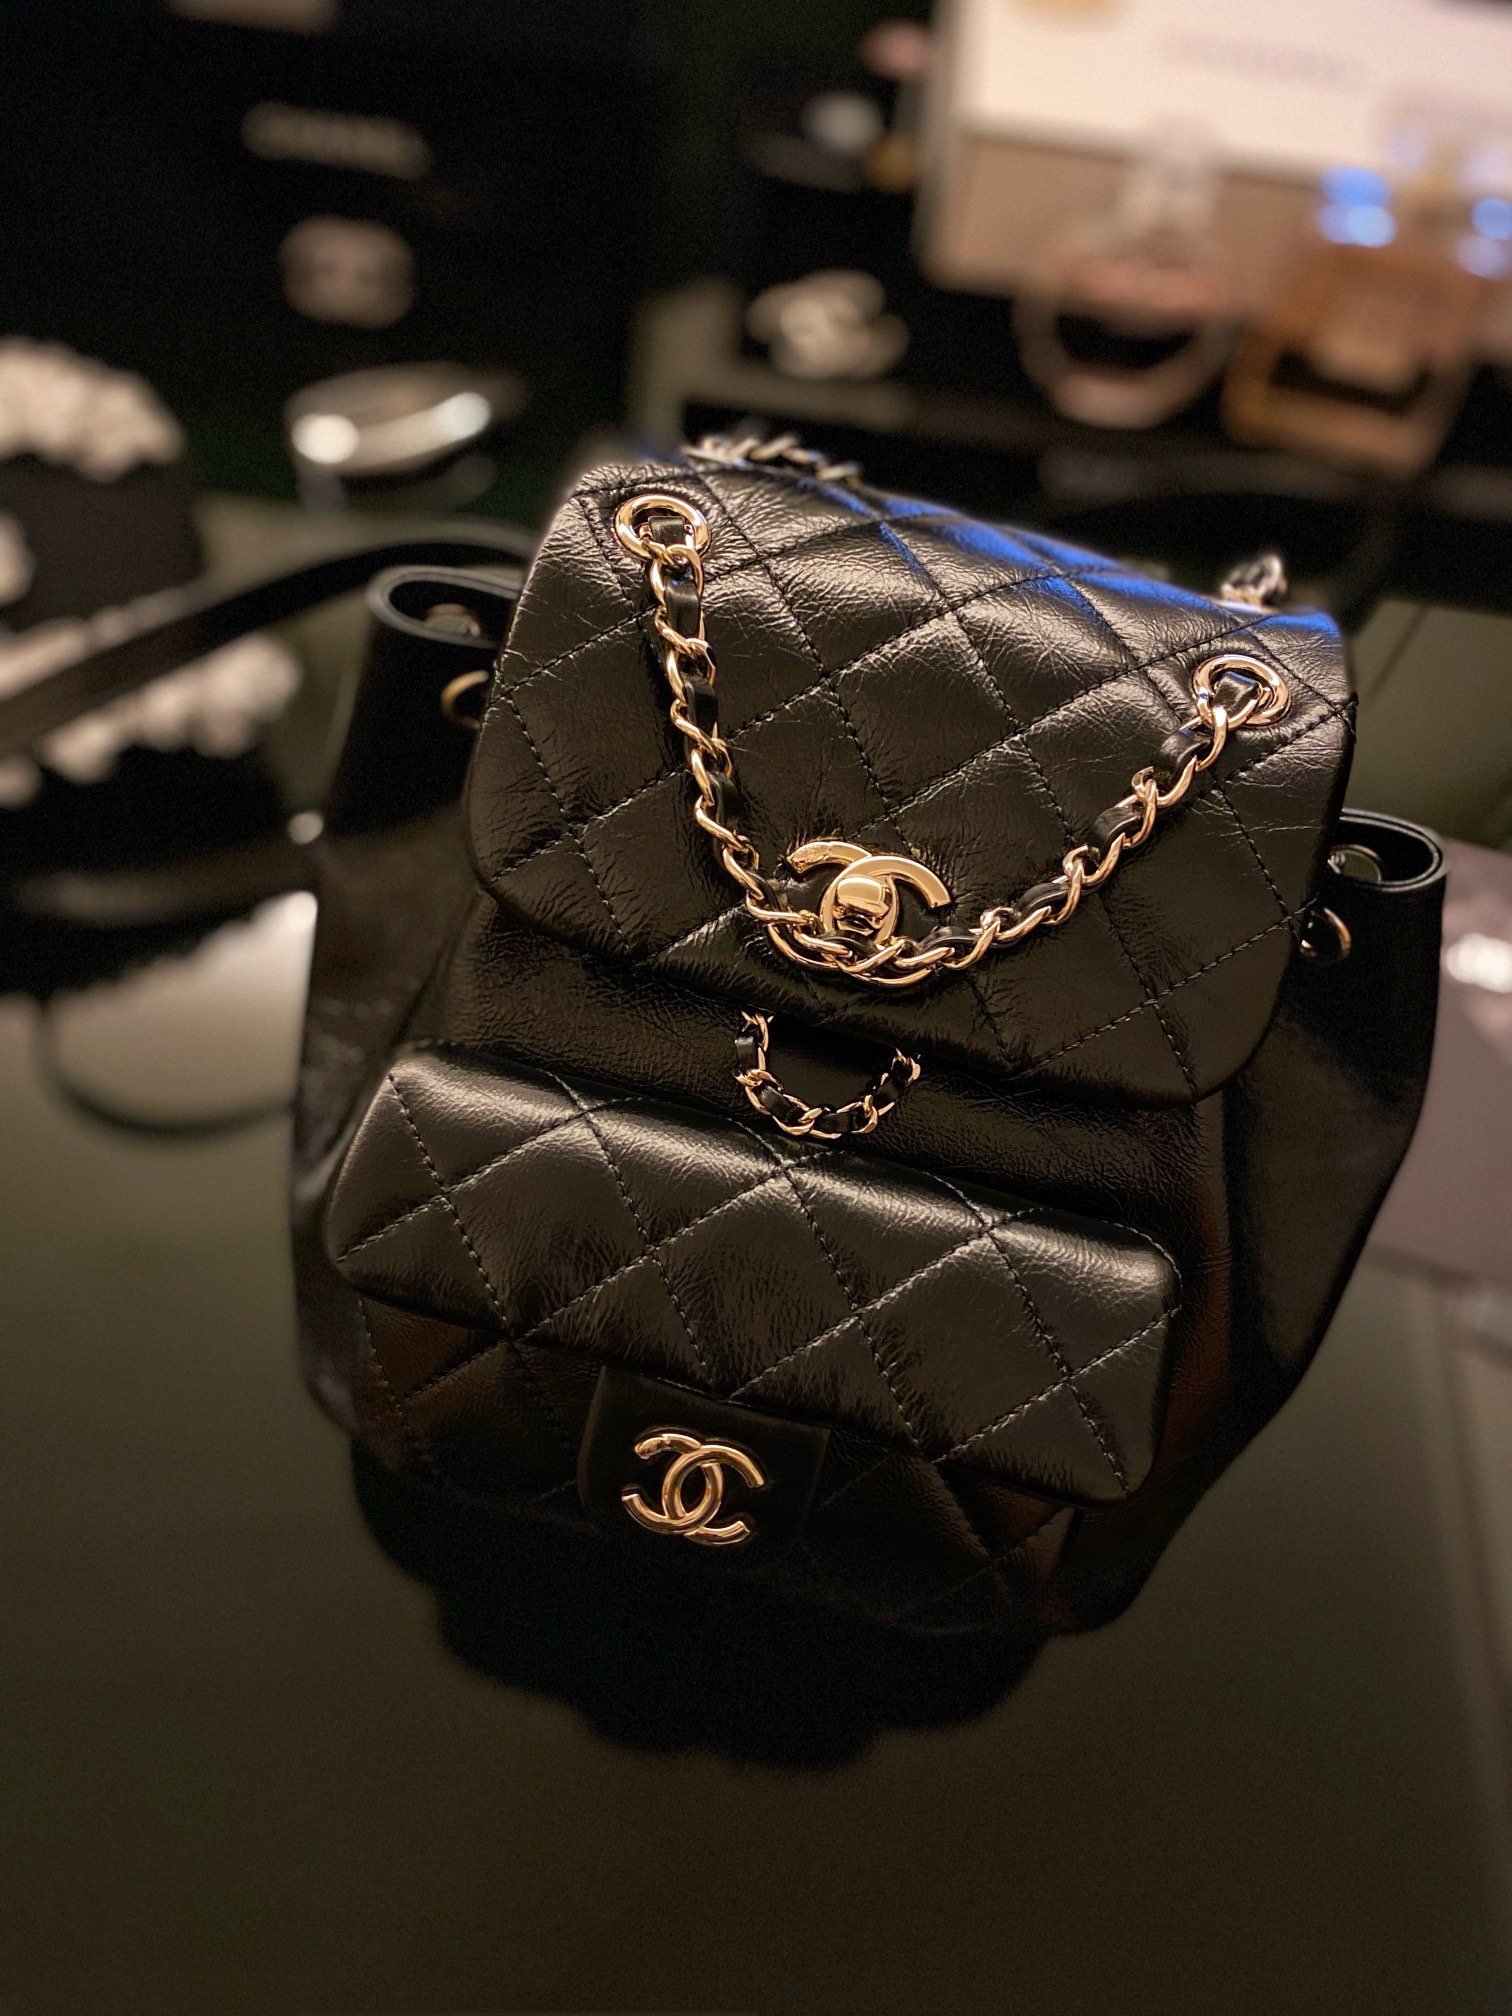 Review of the Chanel Mini